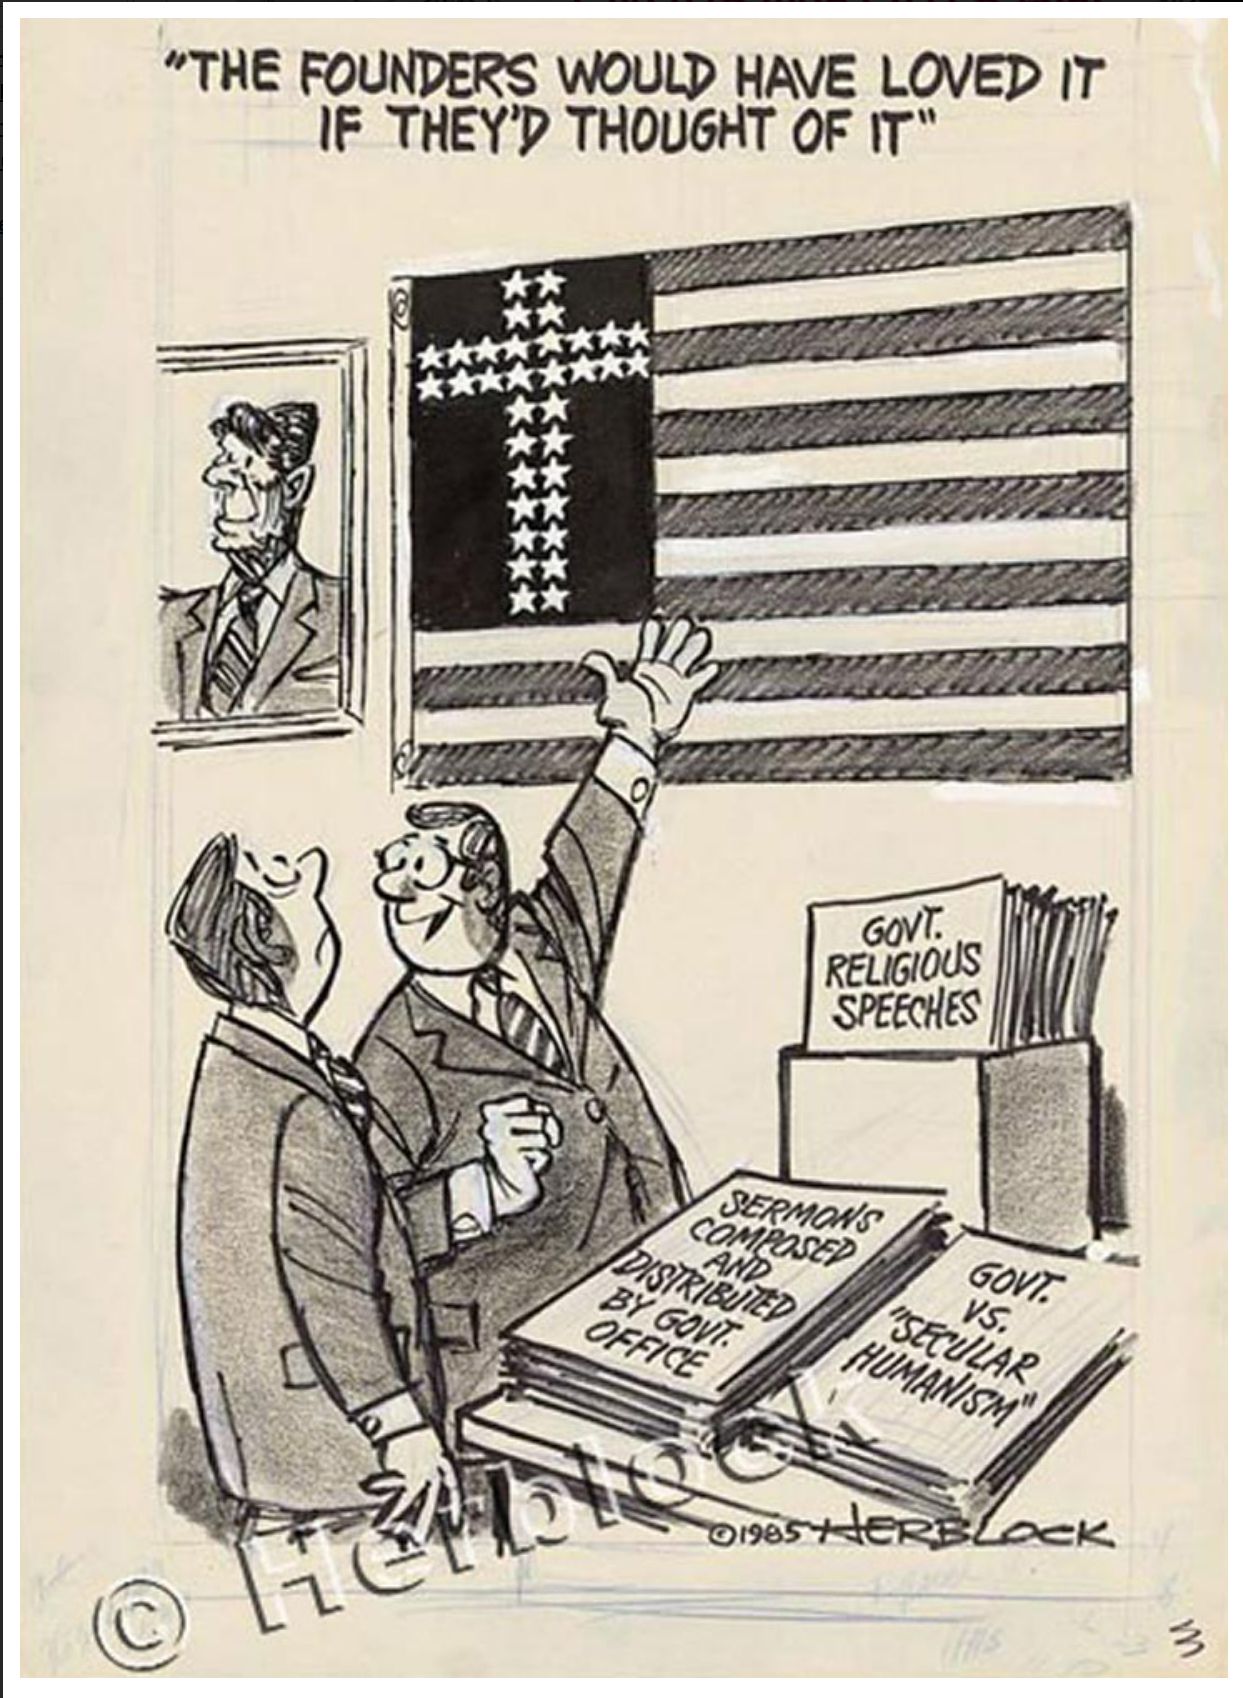 The Founders Would Have Loved It, political cartoon by Herb Block